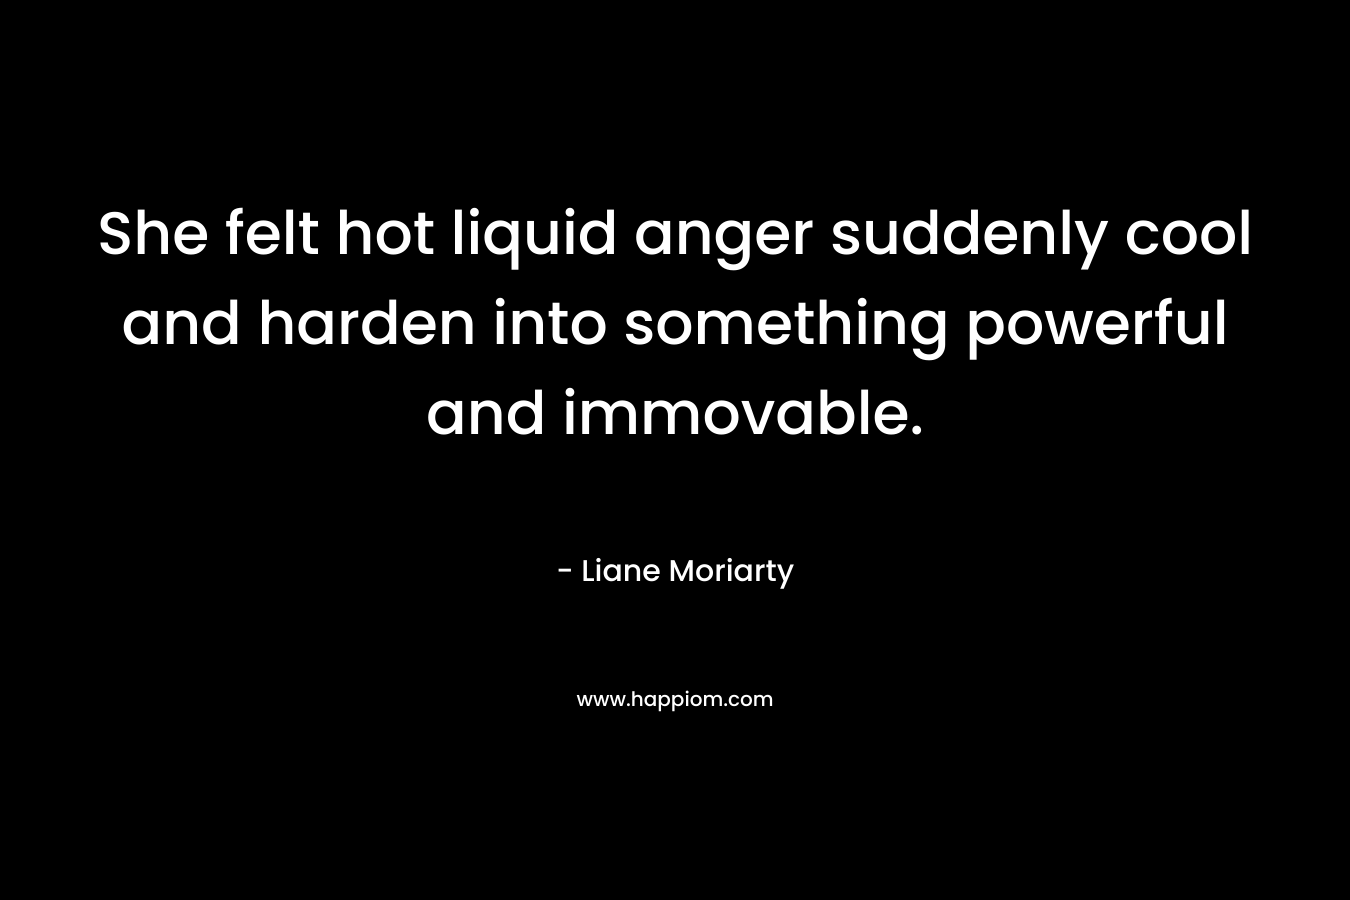 She felt hot liquid anger suddenly cool and harden into something powerful and immovable. – Liane Moriarty